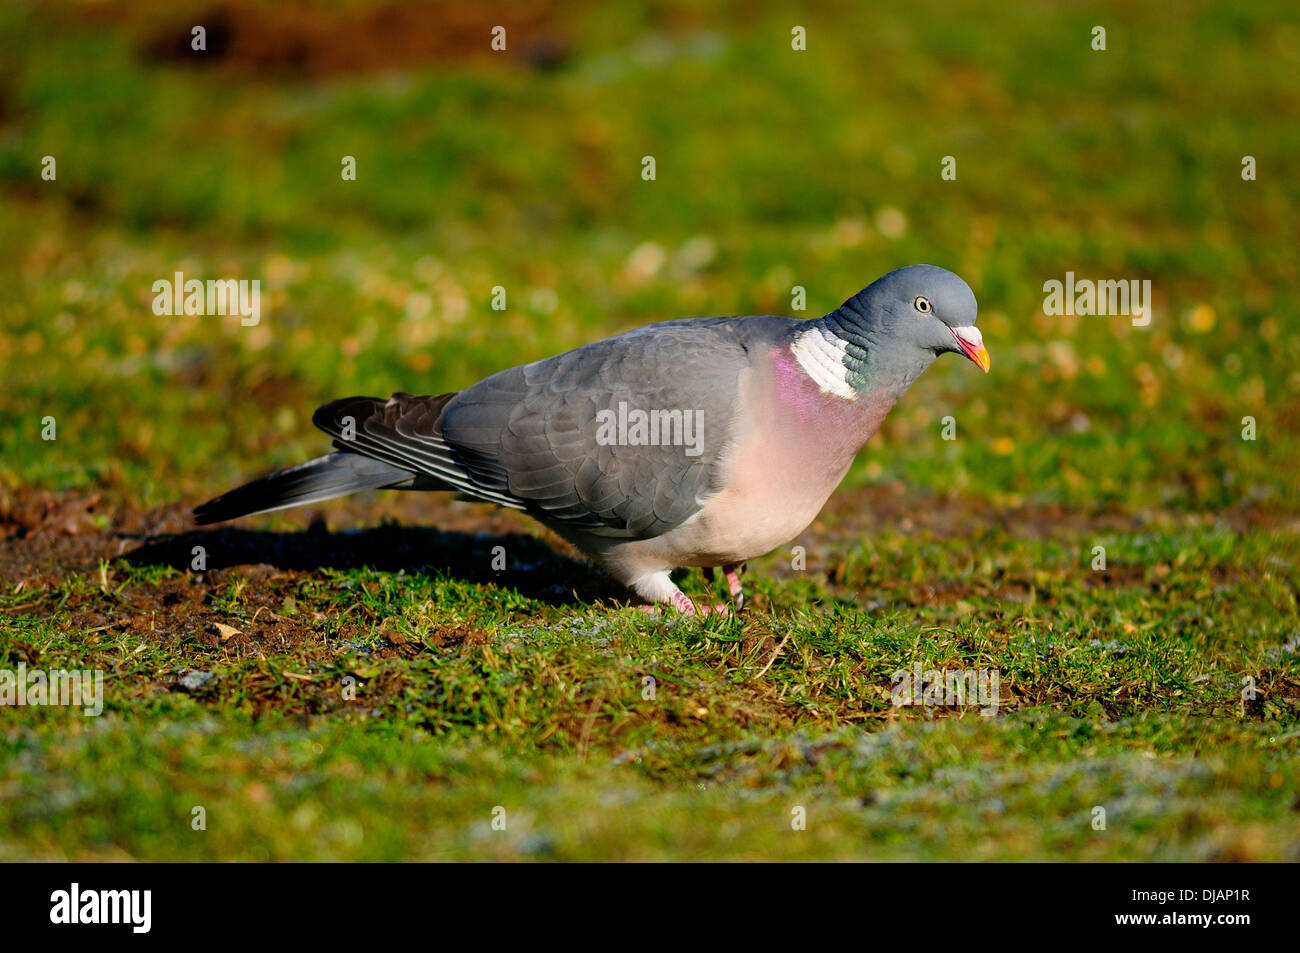 A woodpigeon on a lawn UK Stock Photo